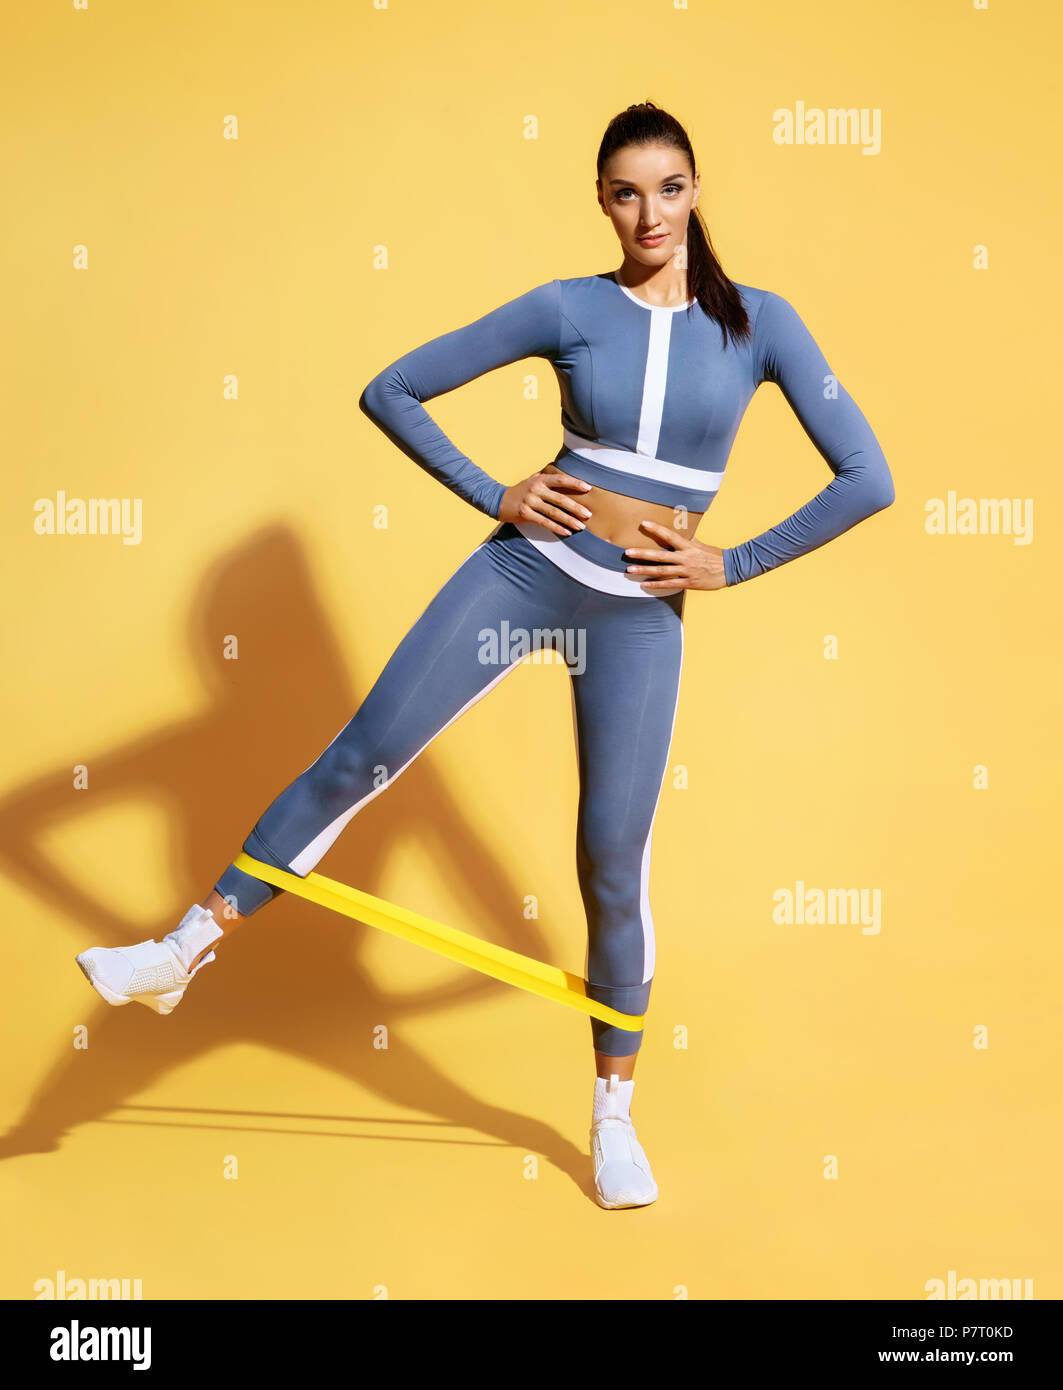 Woman with good physique doing stretching work out with elastic bands. Photo of latin woman in fashionable sportswear on yellow background. Strength a Stock Photo